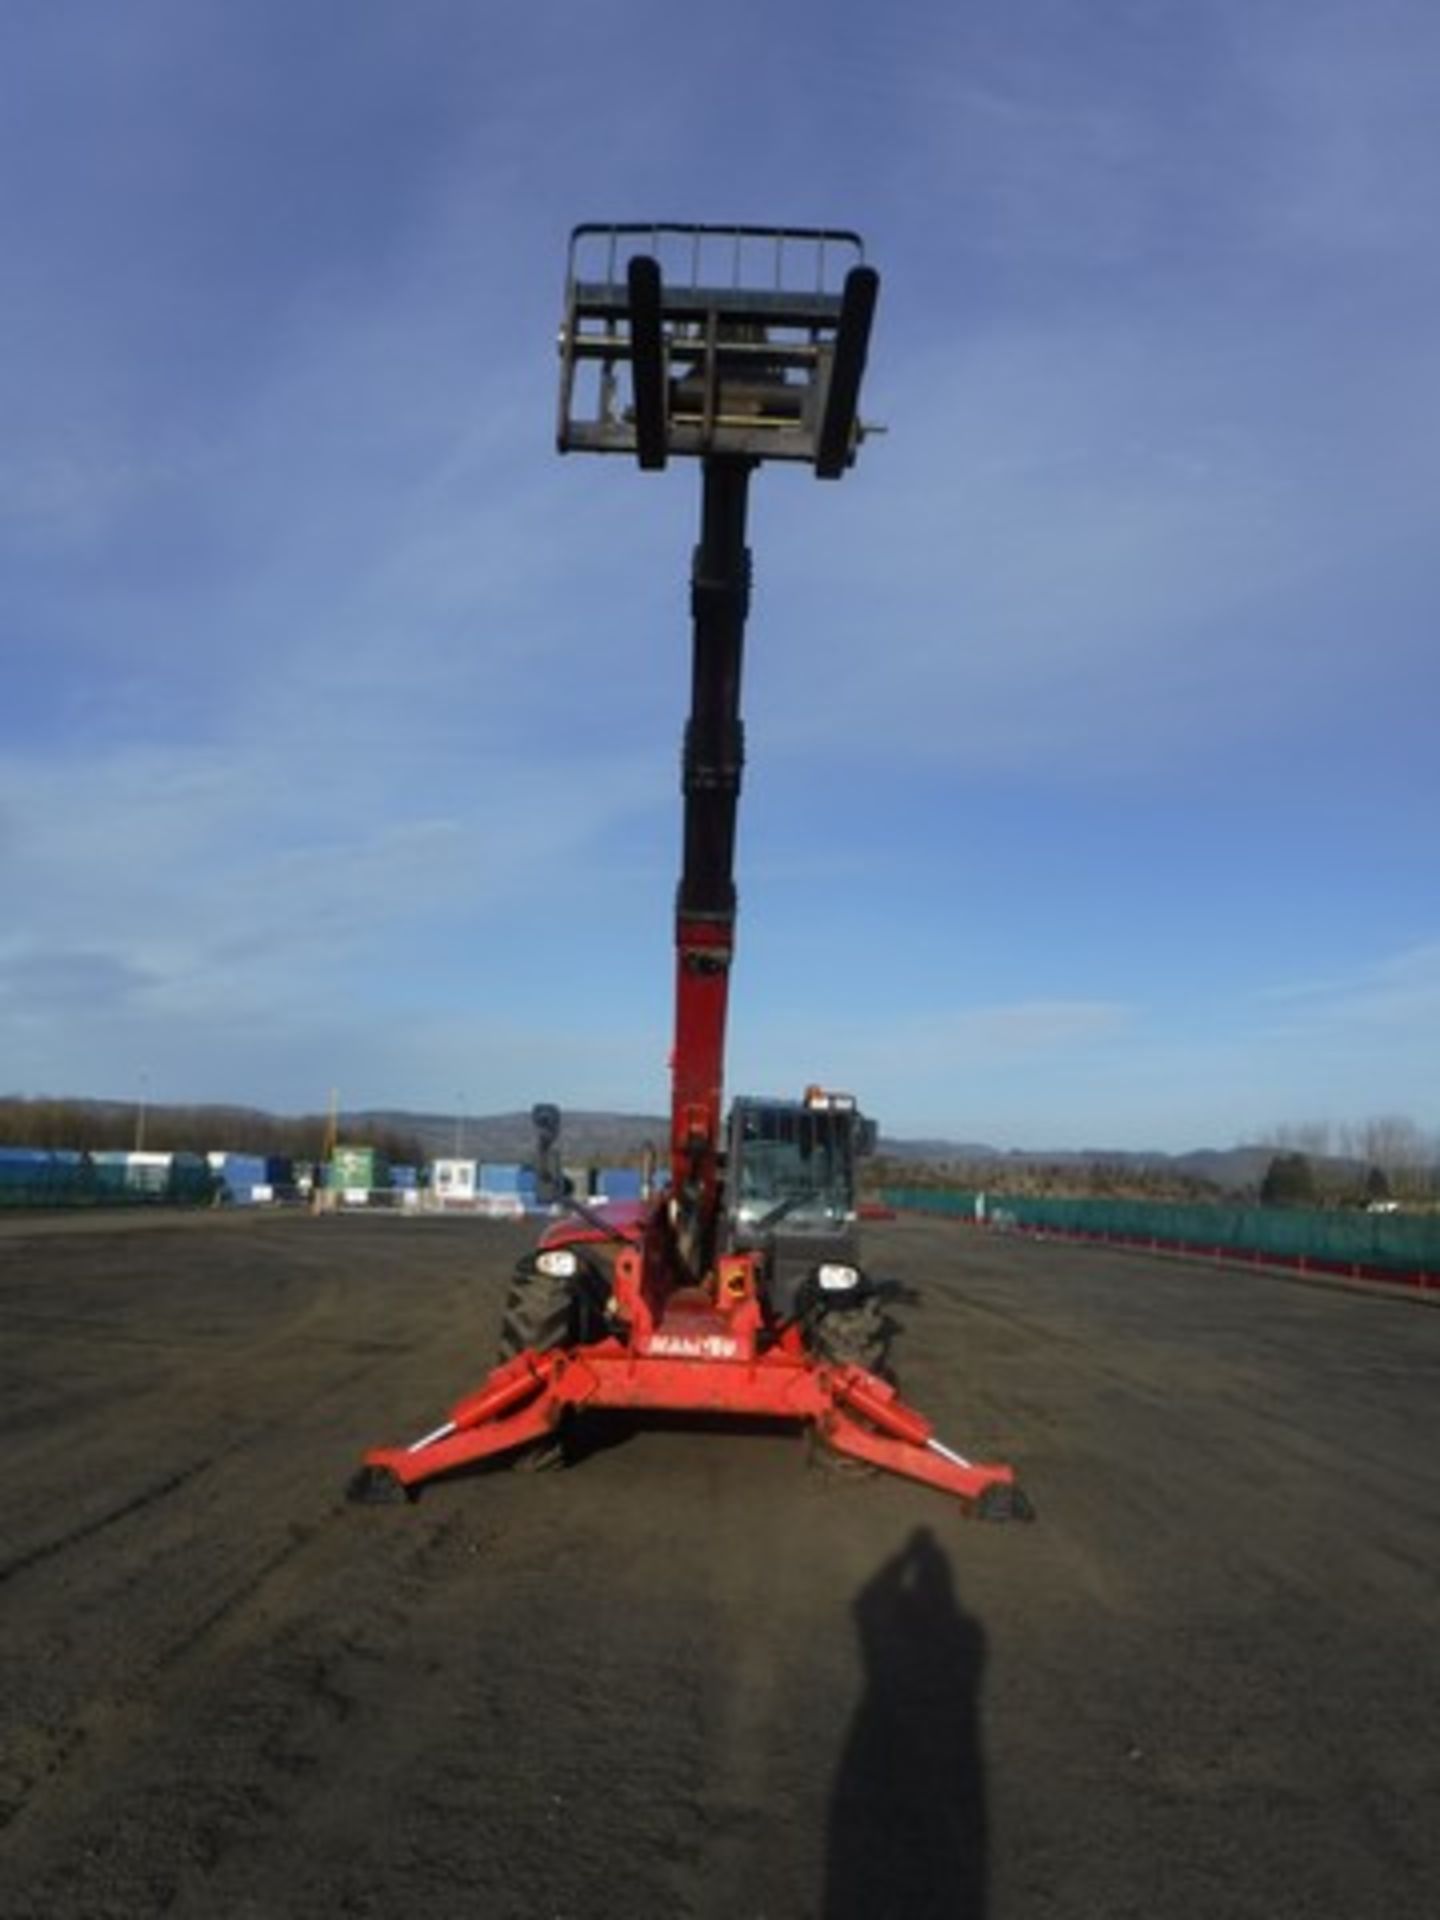 2012 MANITOU MT1840 telehandler c/w pallet forks. CE marked. Lift capacity 4000kg. Max reach 18m. Re - Image 3 of 12